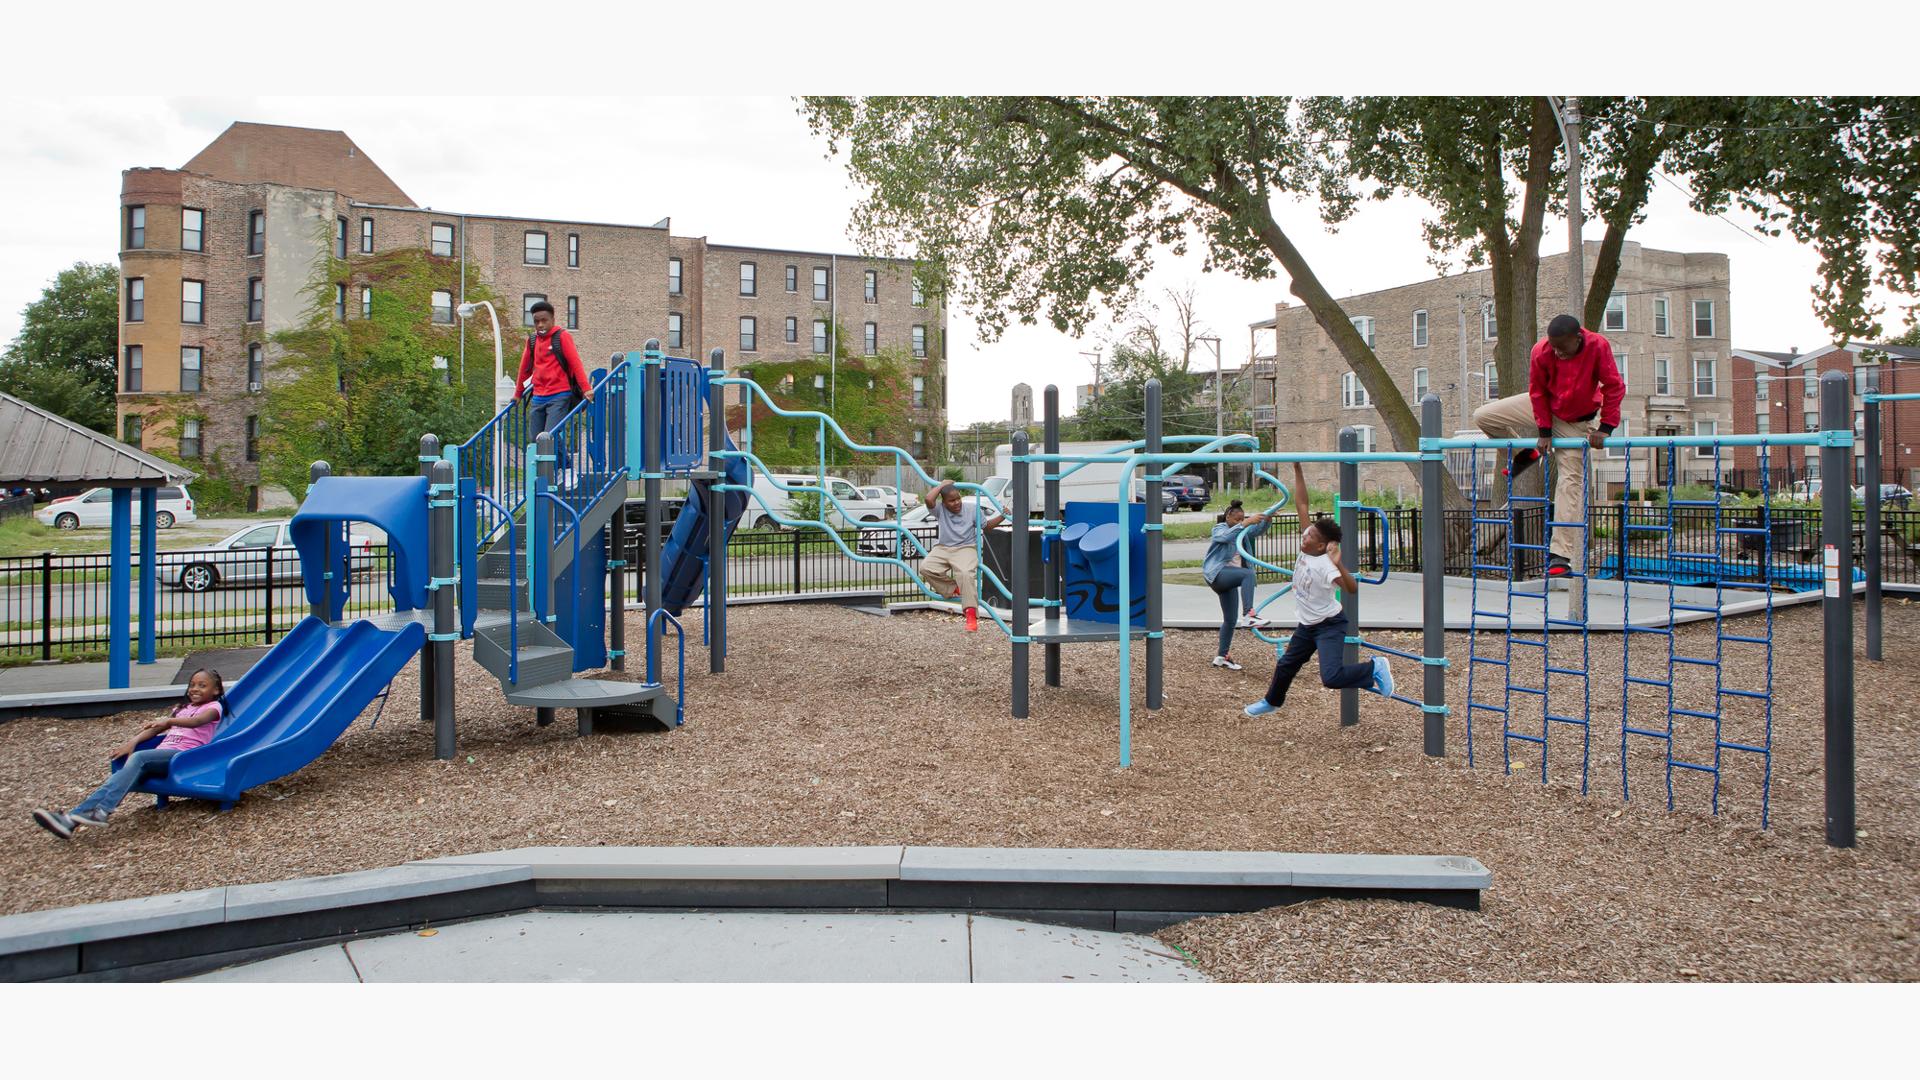 Children play on all the many playground activities at a community park.